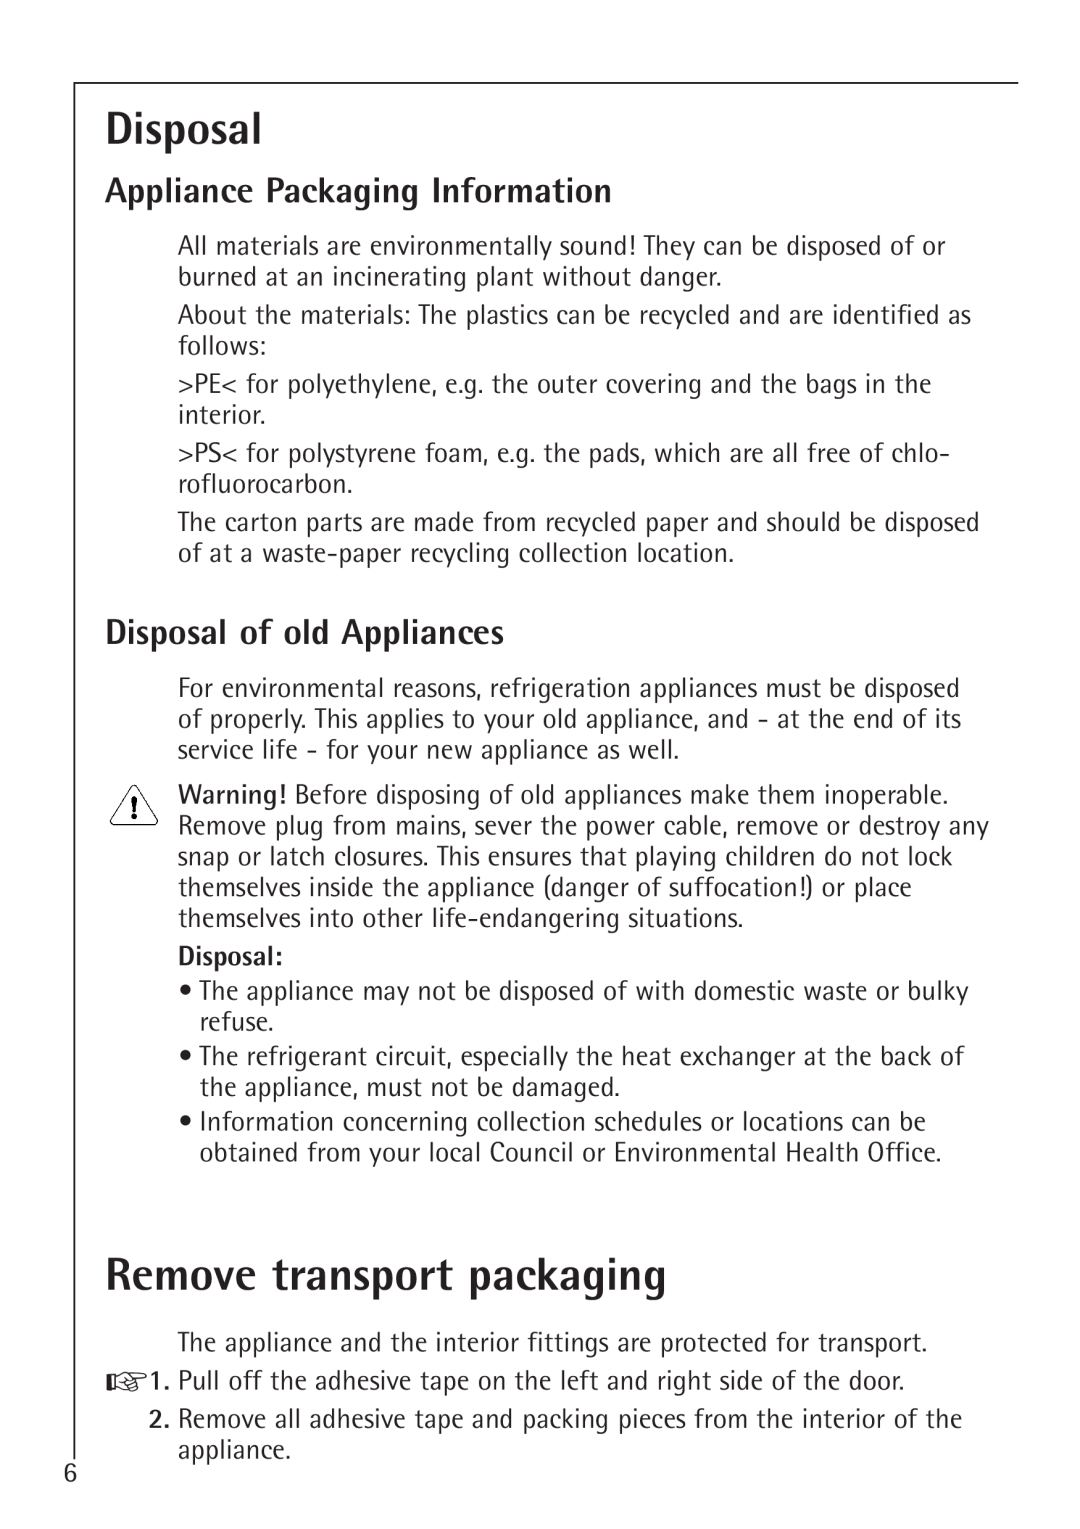 Electrolux U 86000-4 manual Remove transport packaging, Appliance Packaging Information, Disposal of old Appliances 